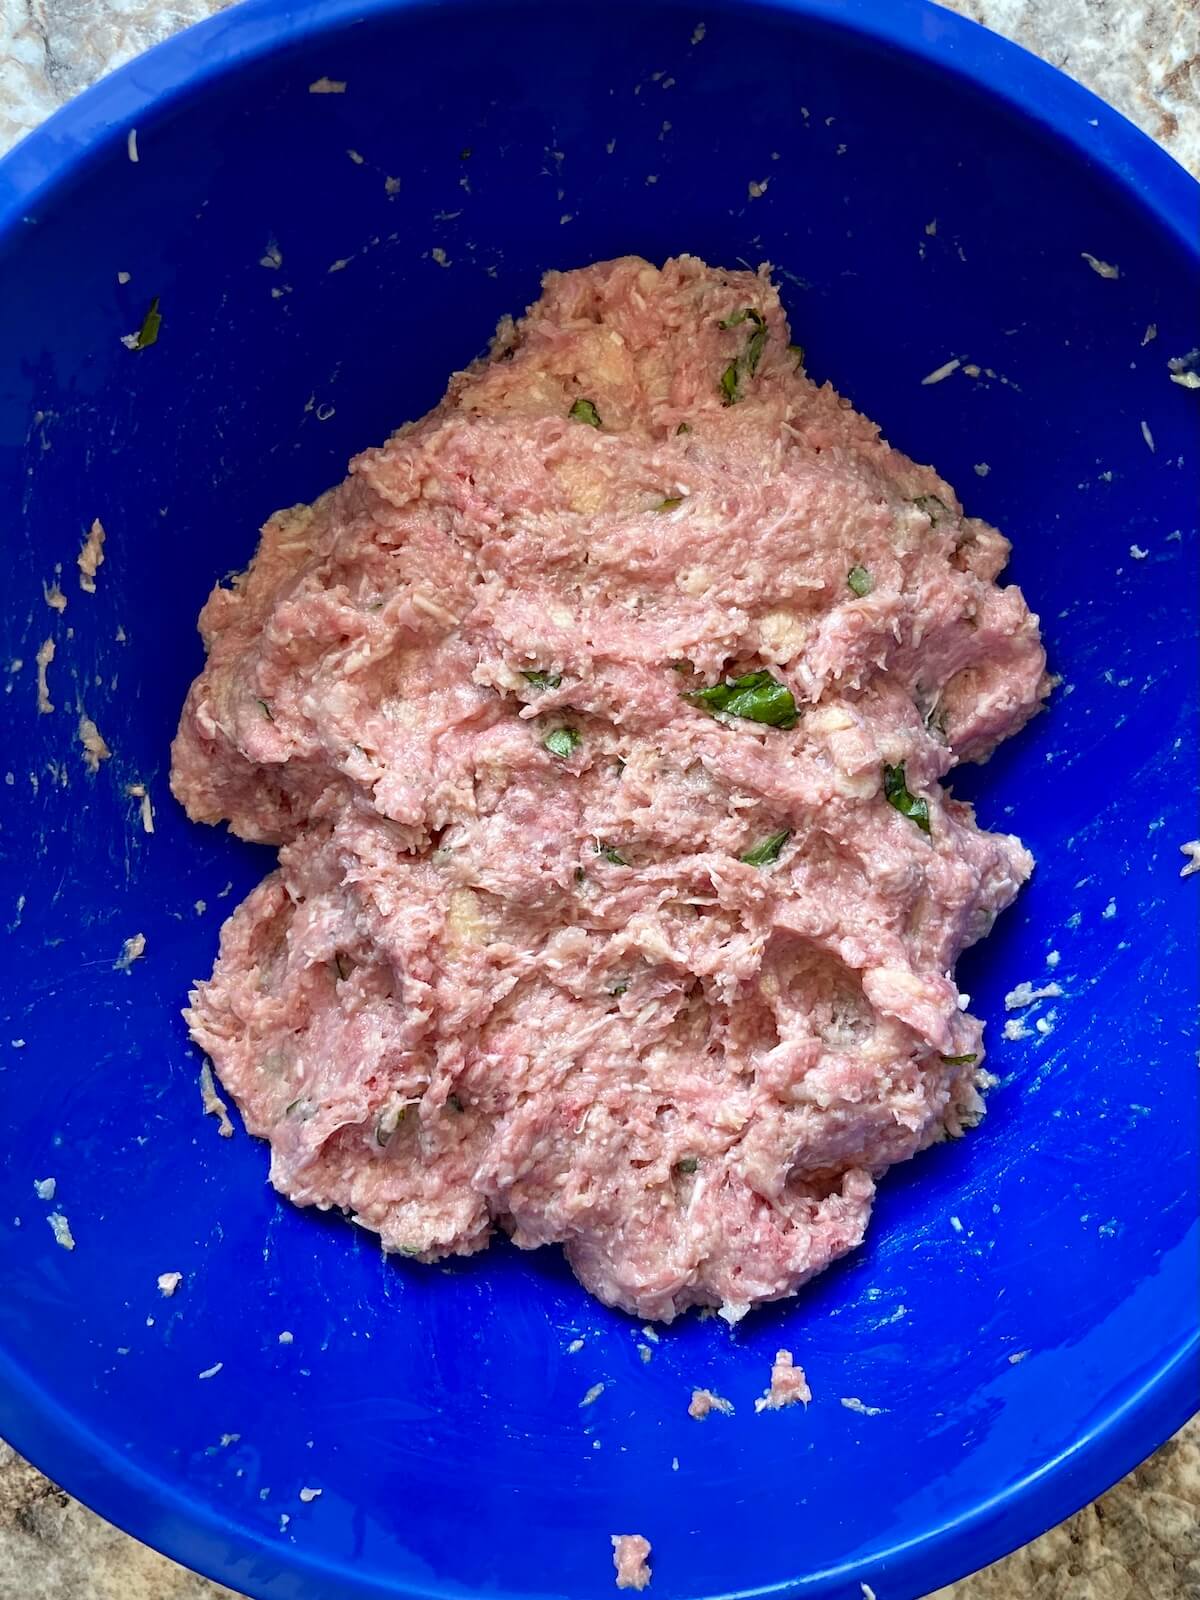 Raw meatball mixture in a royal blue mixing bowl.